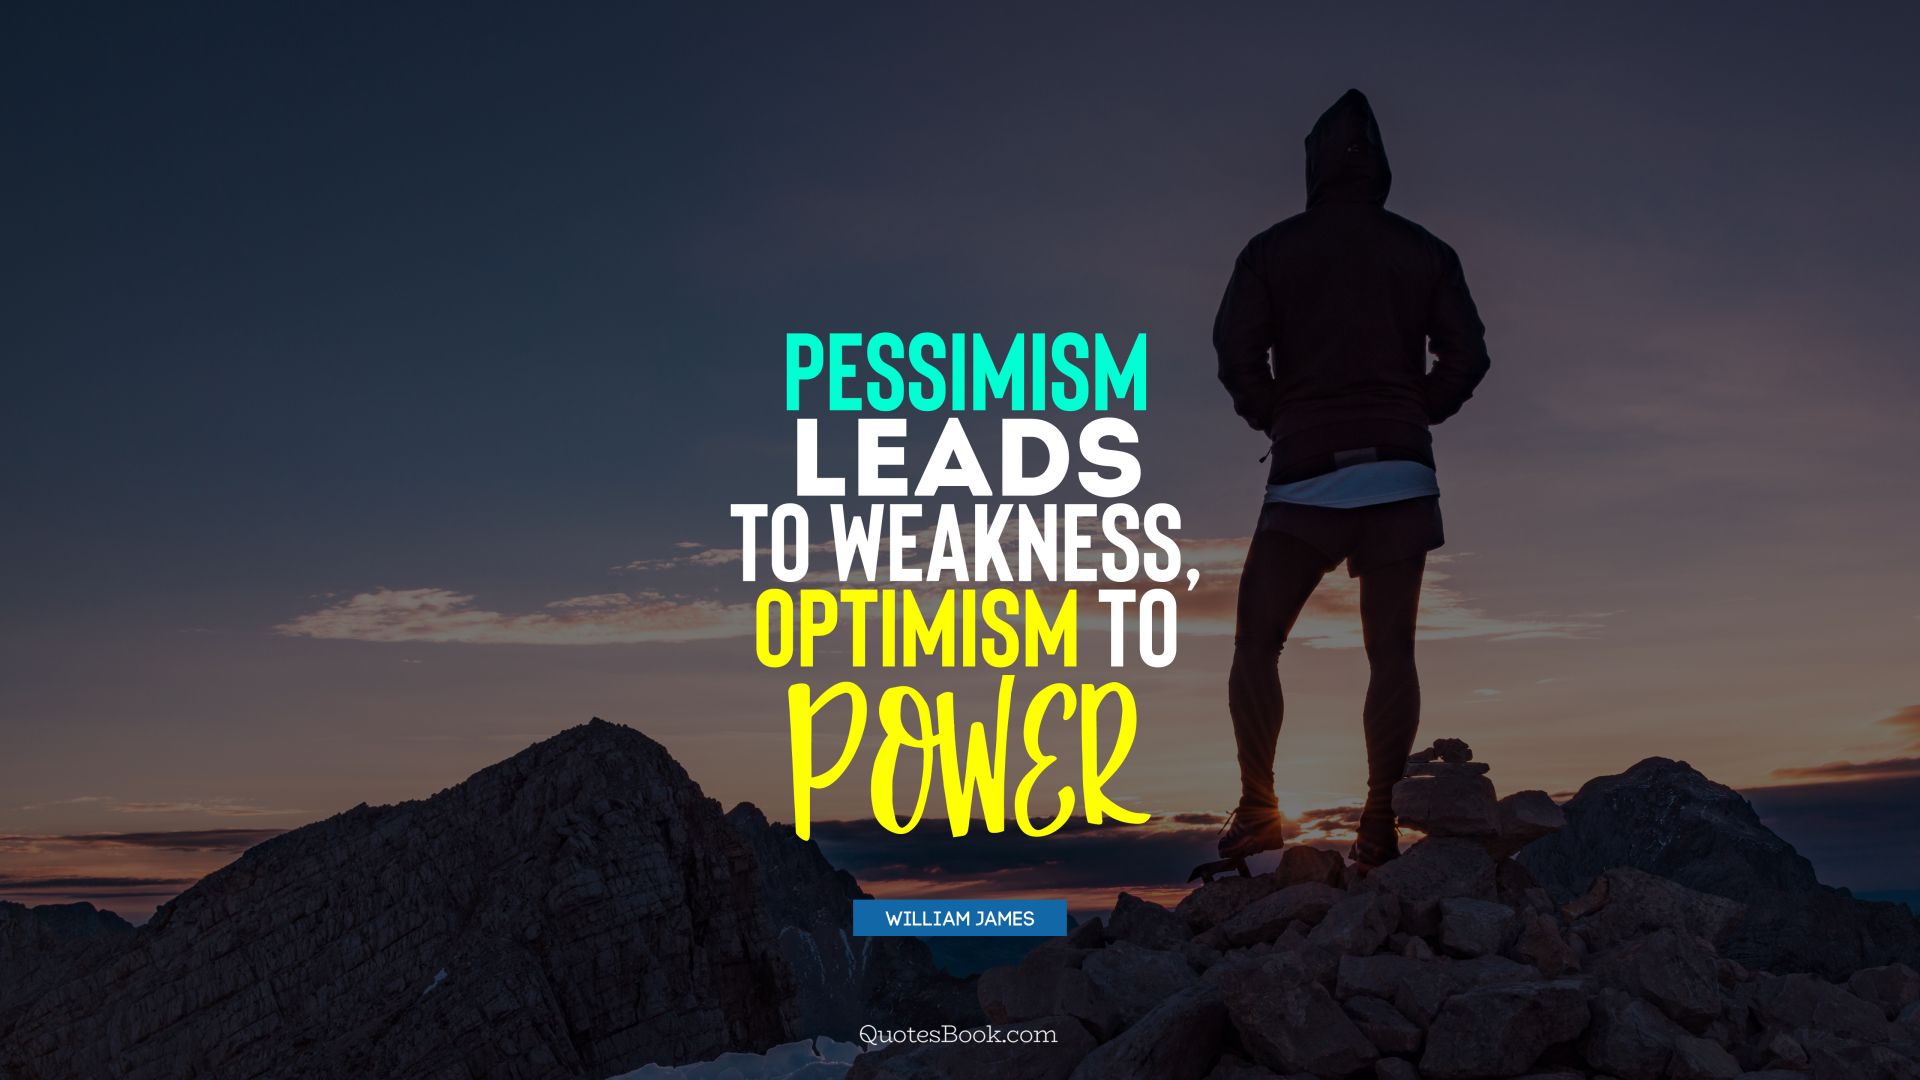 Pessimism leads to weakness, optimism to power. - Quote by William James